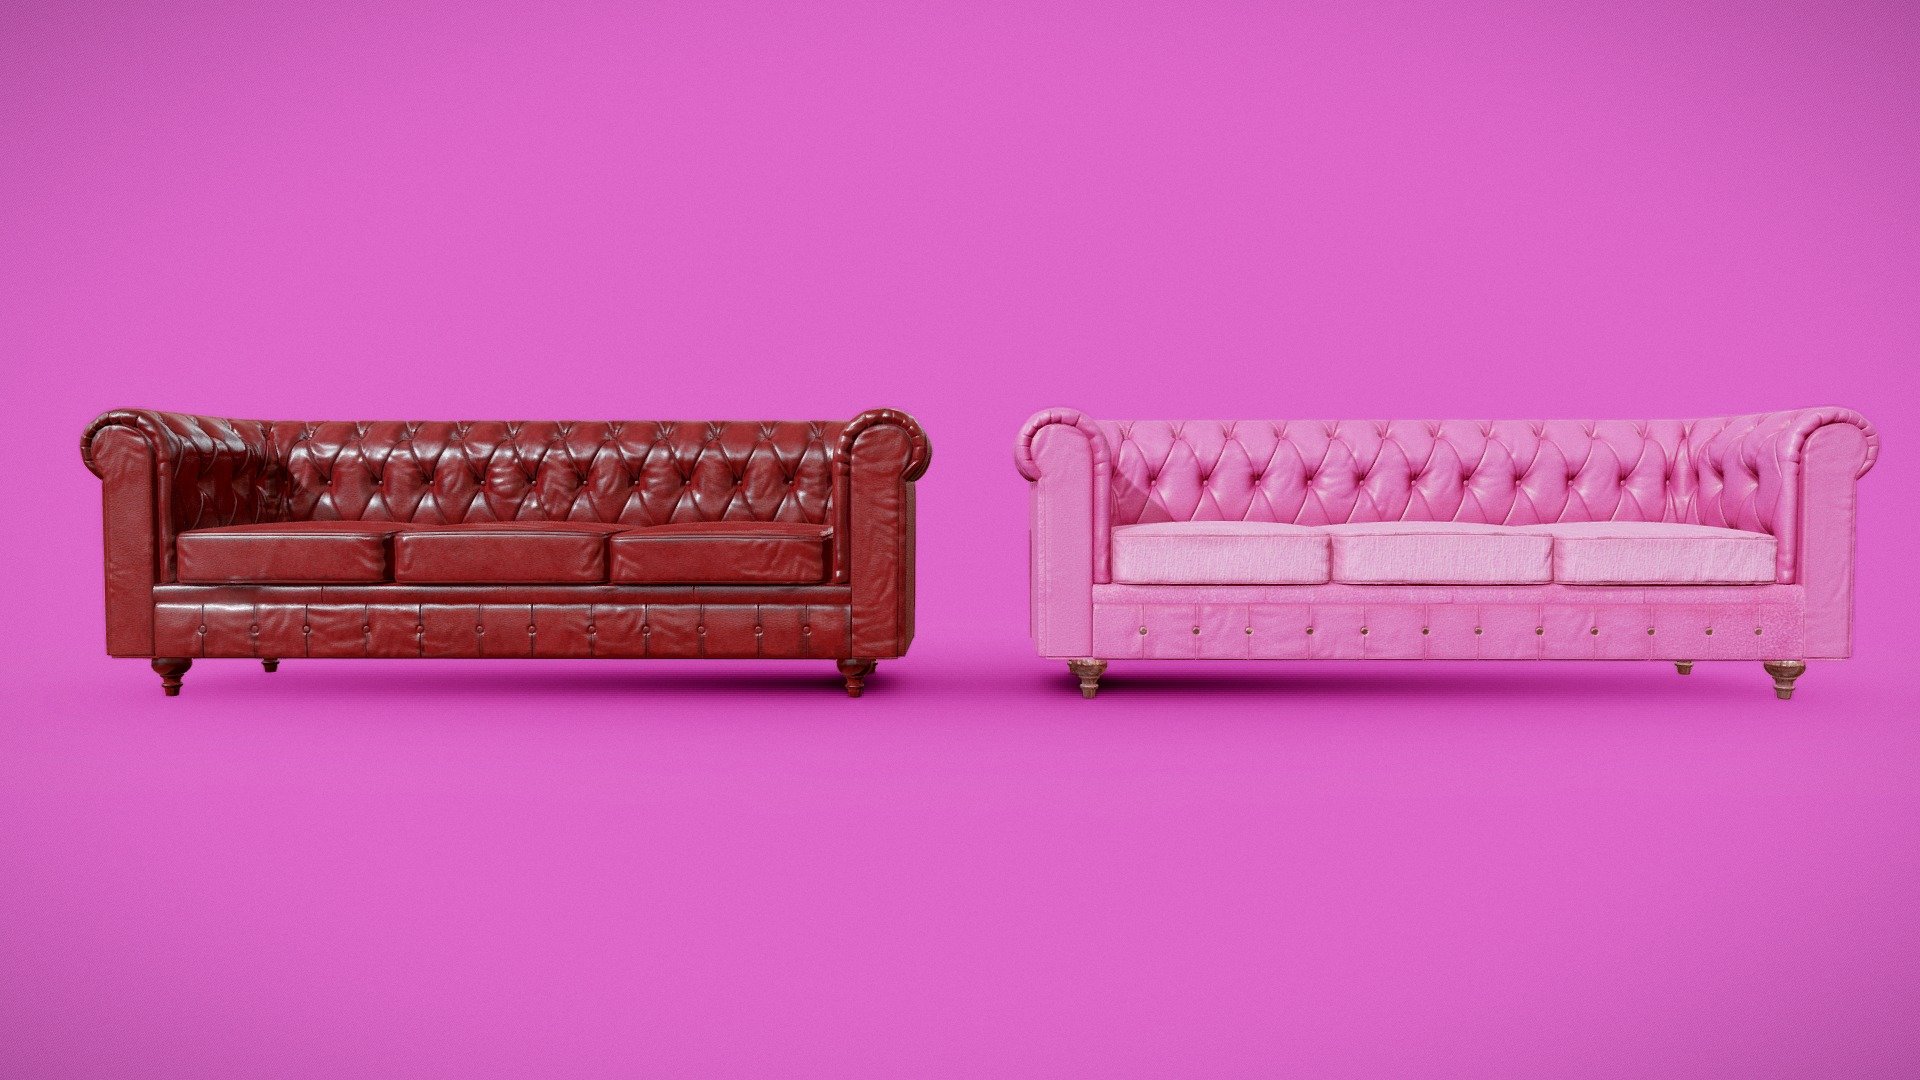 Chesterfield sofa in a deep and elegant red tone. It stands out with its distinctive button-tufted design. A timeless sofa that adds sophistication and warmth to any space.

And the Chesterfield sofa in dusty pink, charming and sophisticated. Its style makes it a standout piece in any setting. Perfect for adding a touch of sweetness and romance to the decor.

My Store
https://sketchfab.com/JoRCS/store




Include additional files

Obj and Fbx fotmat. High-quality PBR textures in png format.
 - chesterfield Sofa red & pink - Barbie - Buy Royalty Free 3D model by JoRCS 3d model